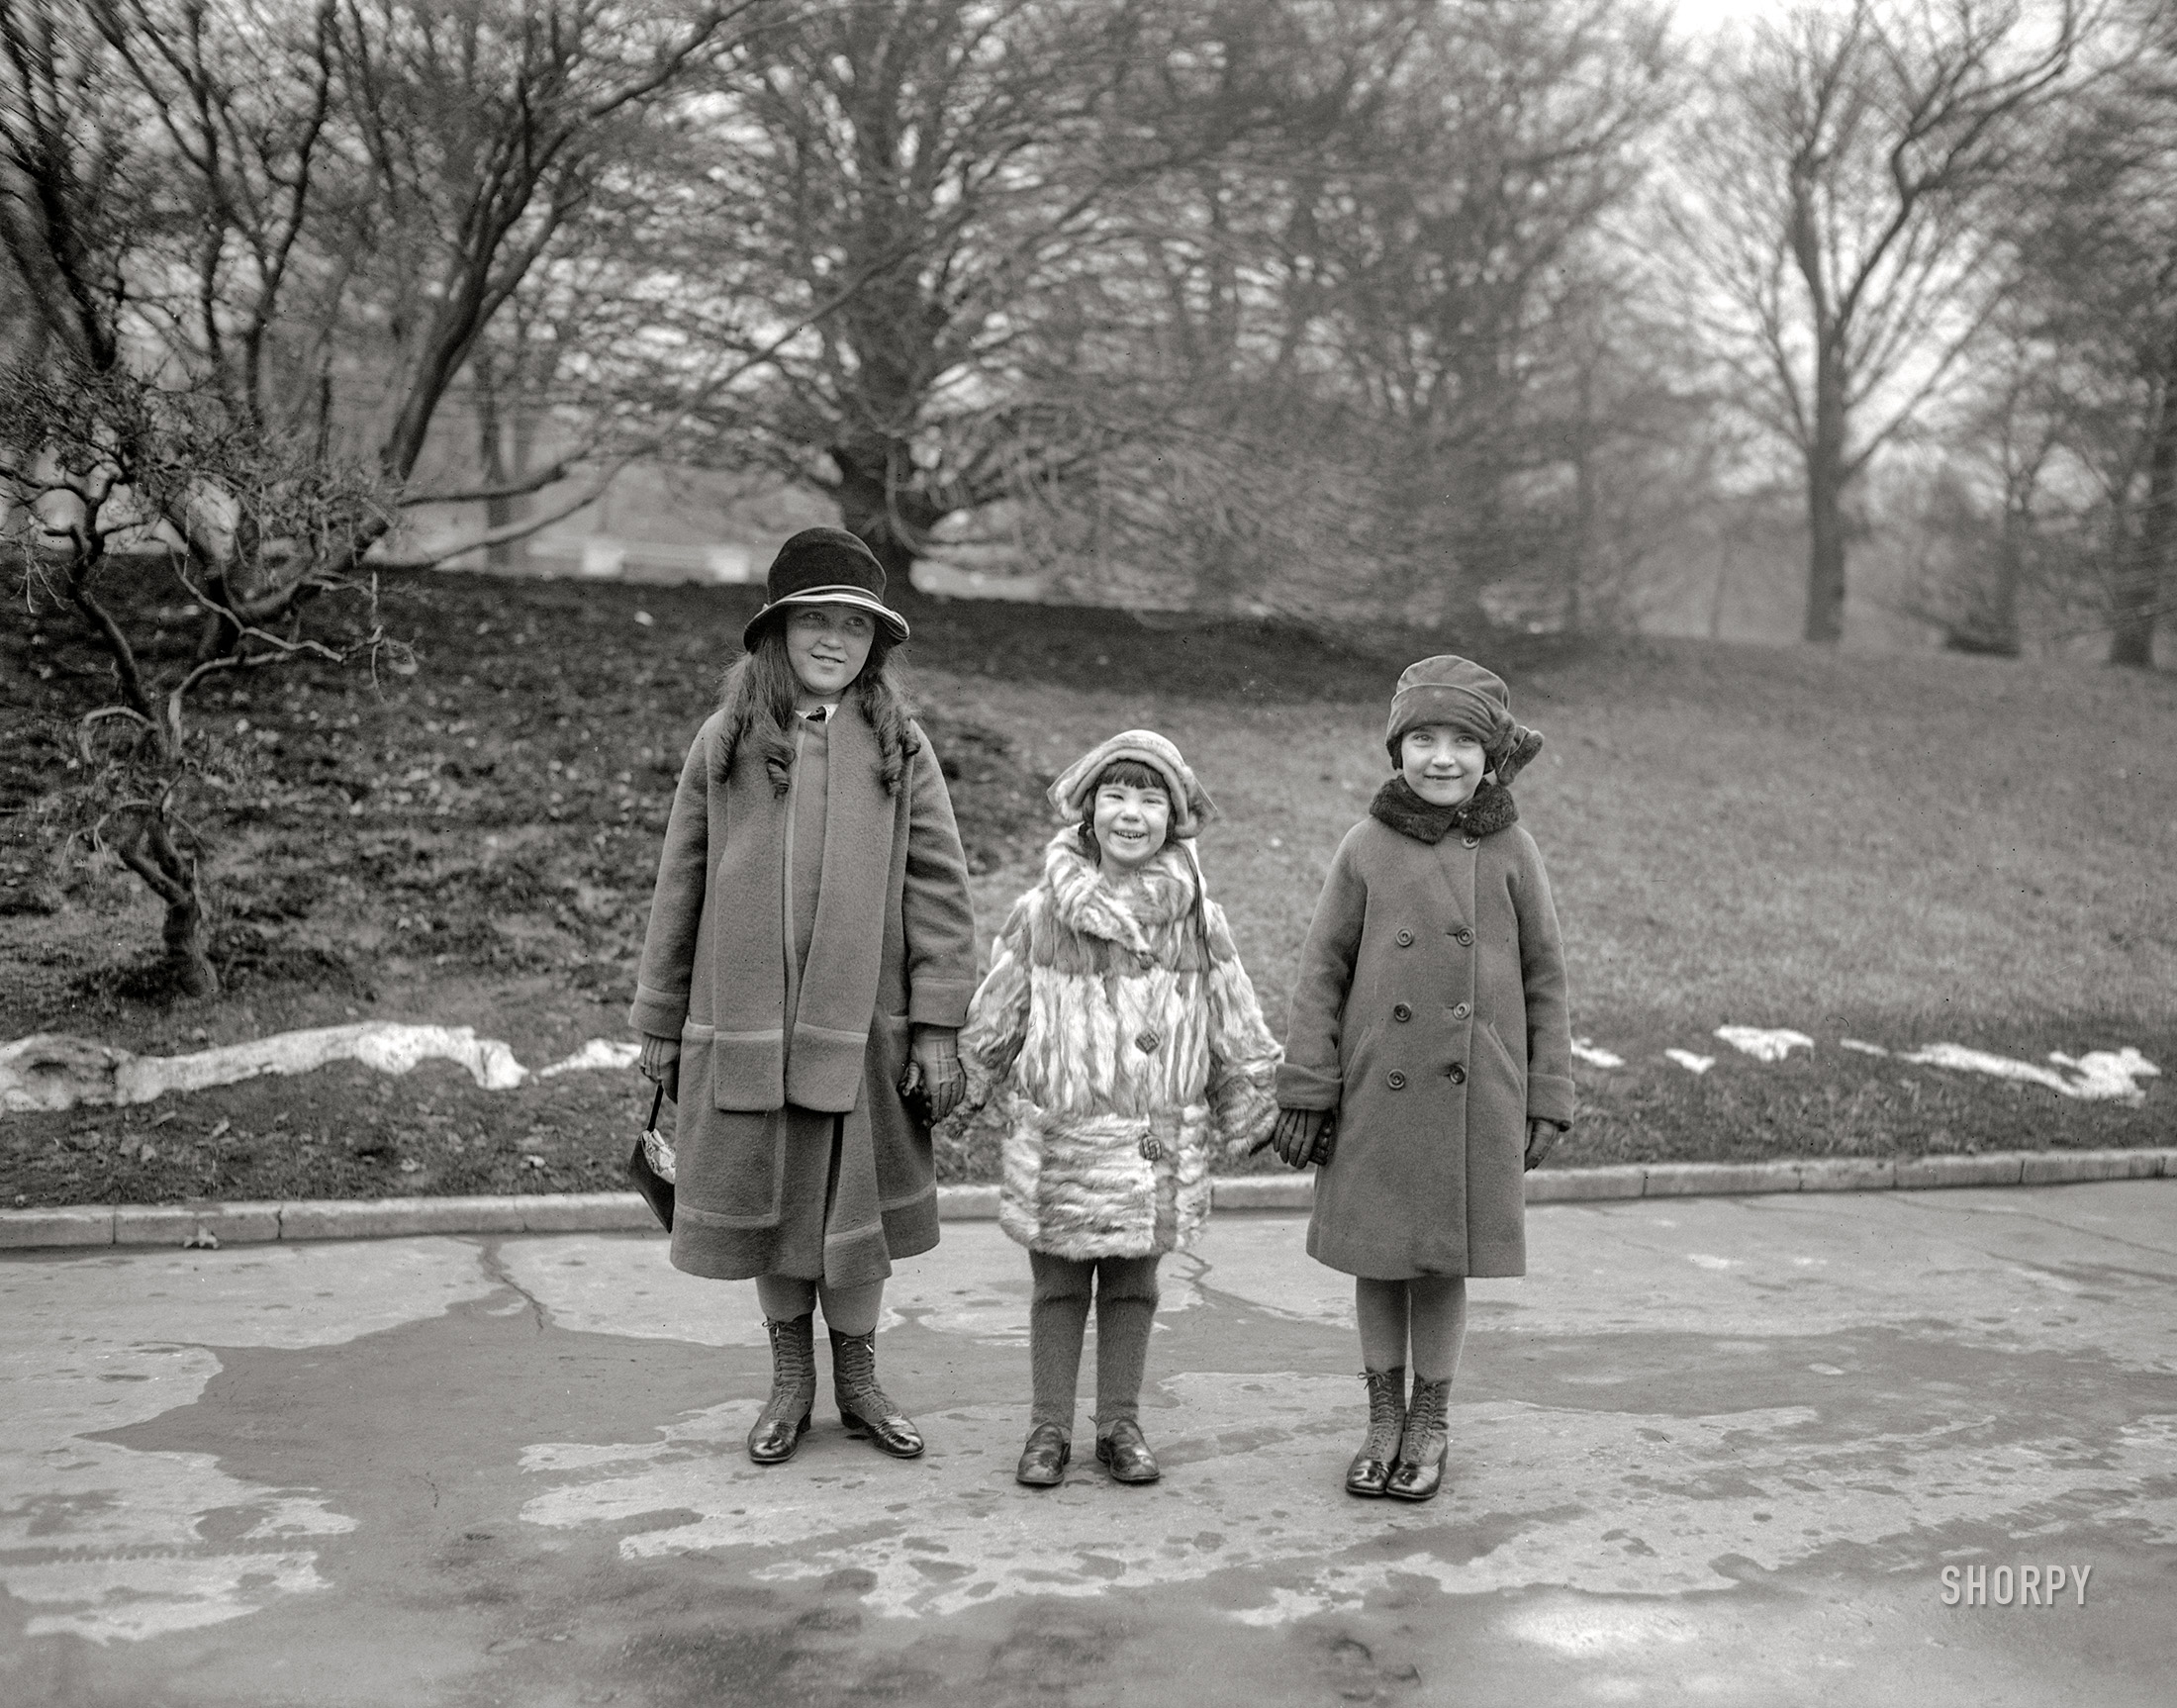 Feb. 2, 1925. "FILM STAR VISITS THE PRESIDENT. Baby Peggy, one of the youngest movie stars, at the White House today with Frances and Gene Quirk of New York, saw the sights of Washington and made an informal call upon President Coolidge." View full size.
Diana Cary, Child Star ‘Baby Peggy’
of Silent Films, Dies at 101
&nbsp; &nbsp; &nbsp; &nbsp; Diana Serra Cary, probably the last surviving child superstar of the silent film era nearly a century ago, who spent decades coming to terms with a bizarre childhood of triumphs, heartbreaks and parents who squandered her fortune, died on Monday in Gustine, Calif. She was 101.
— New York Times